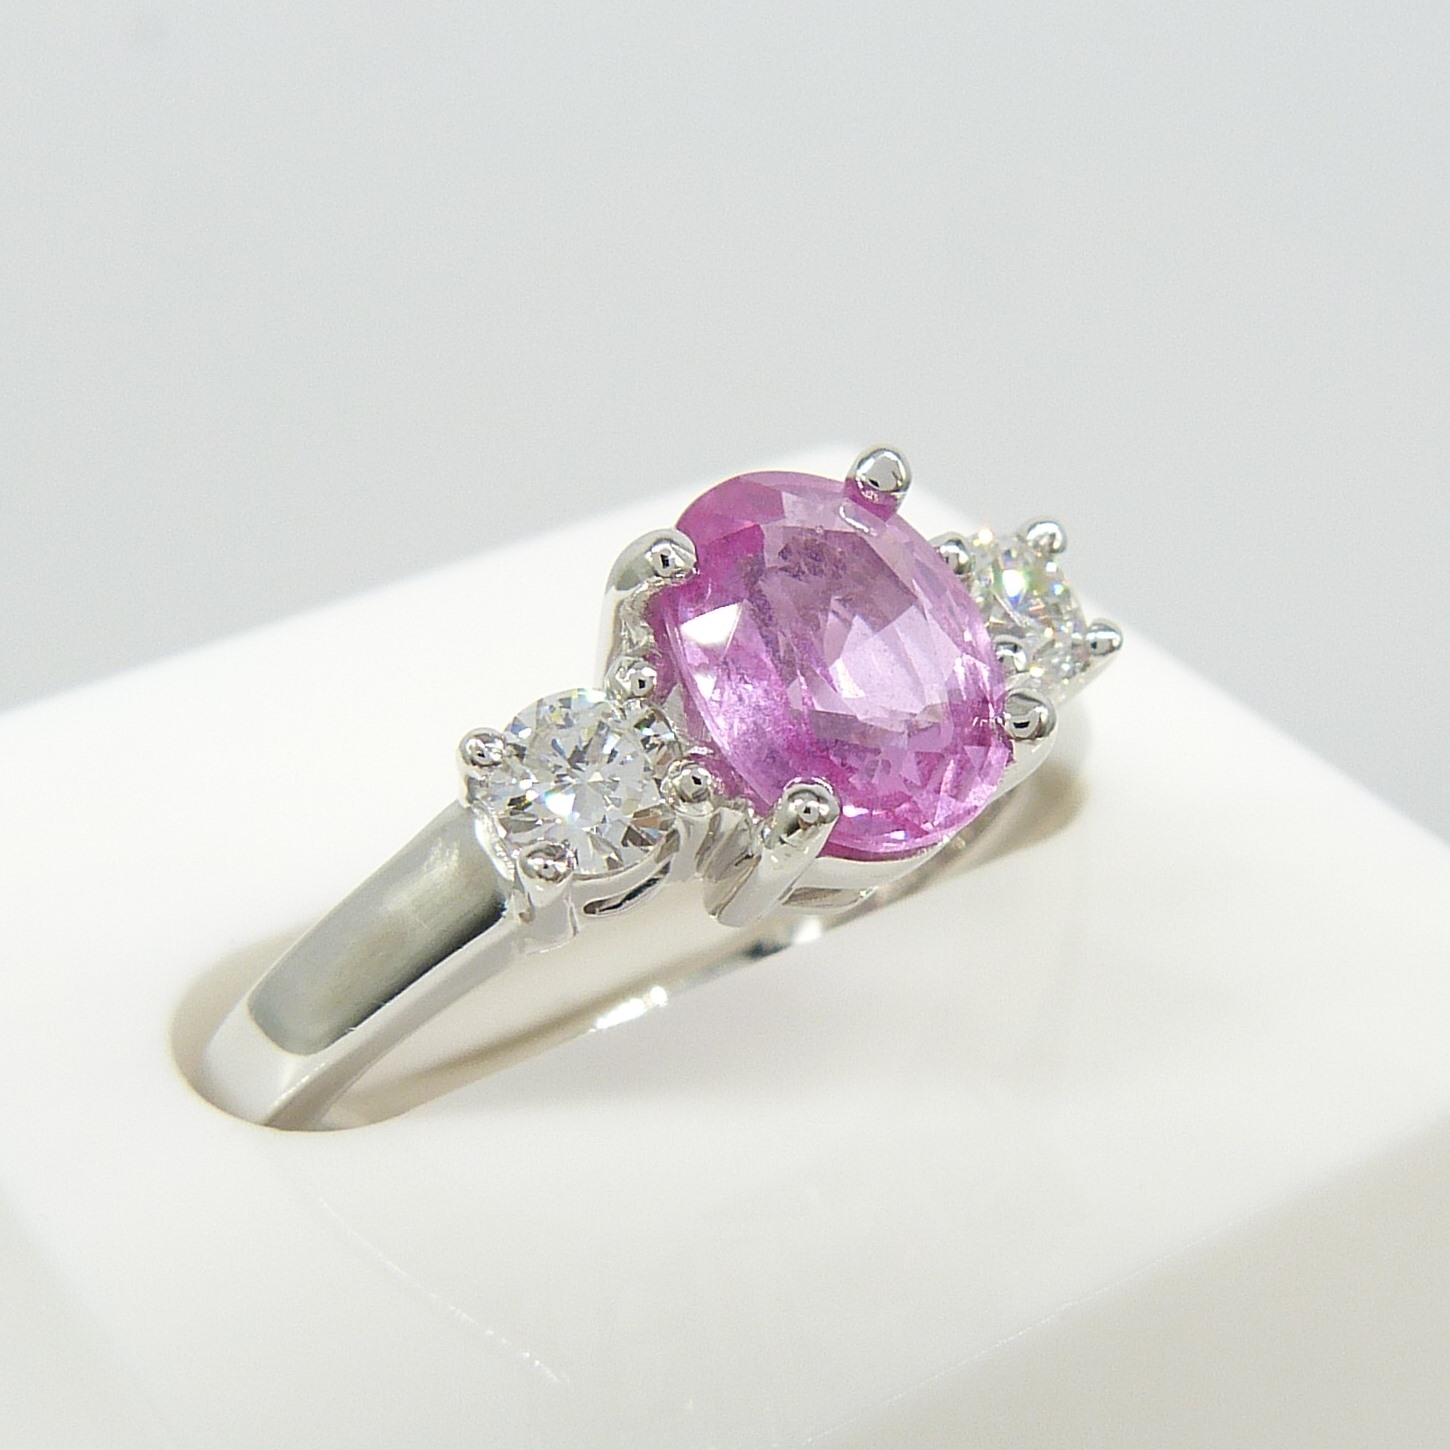 1.50 carat pink sapphire and 0.35 carat diamond 3-stone dress ring in 18ct white gold - Image 7 of 8